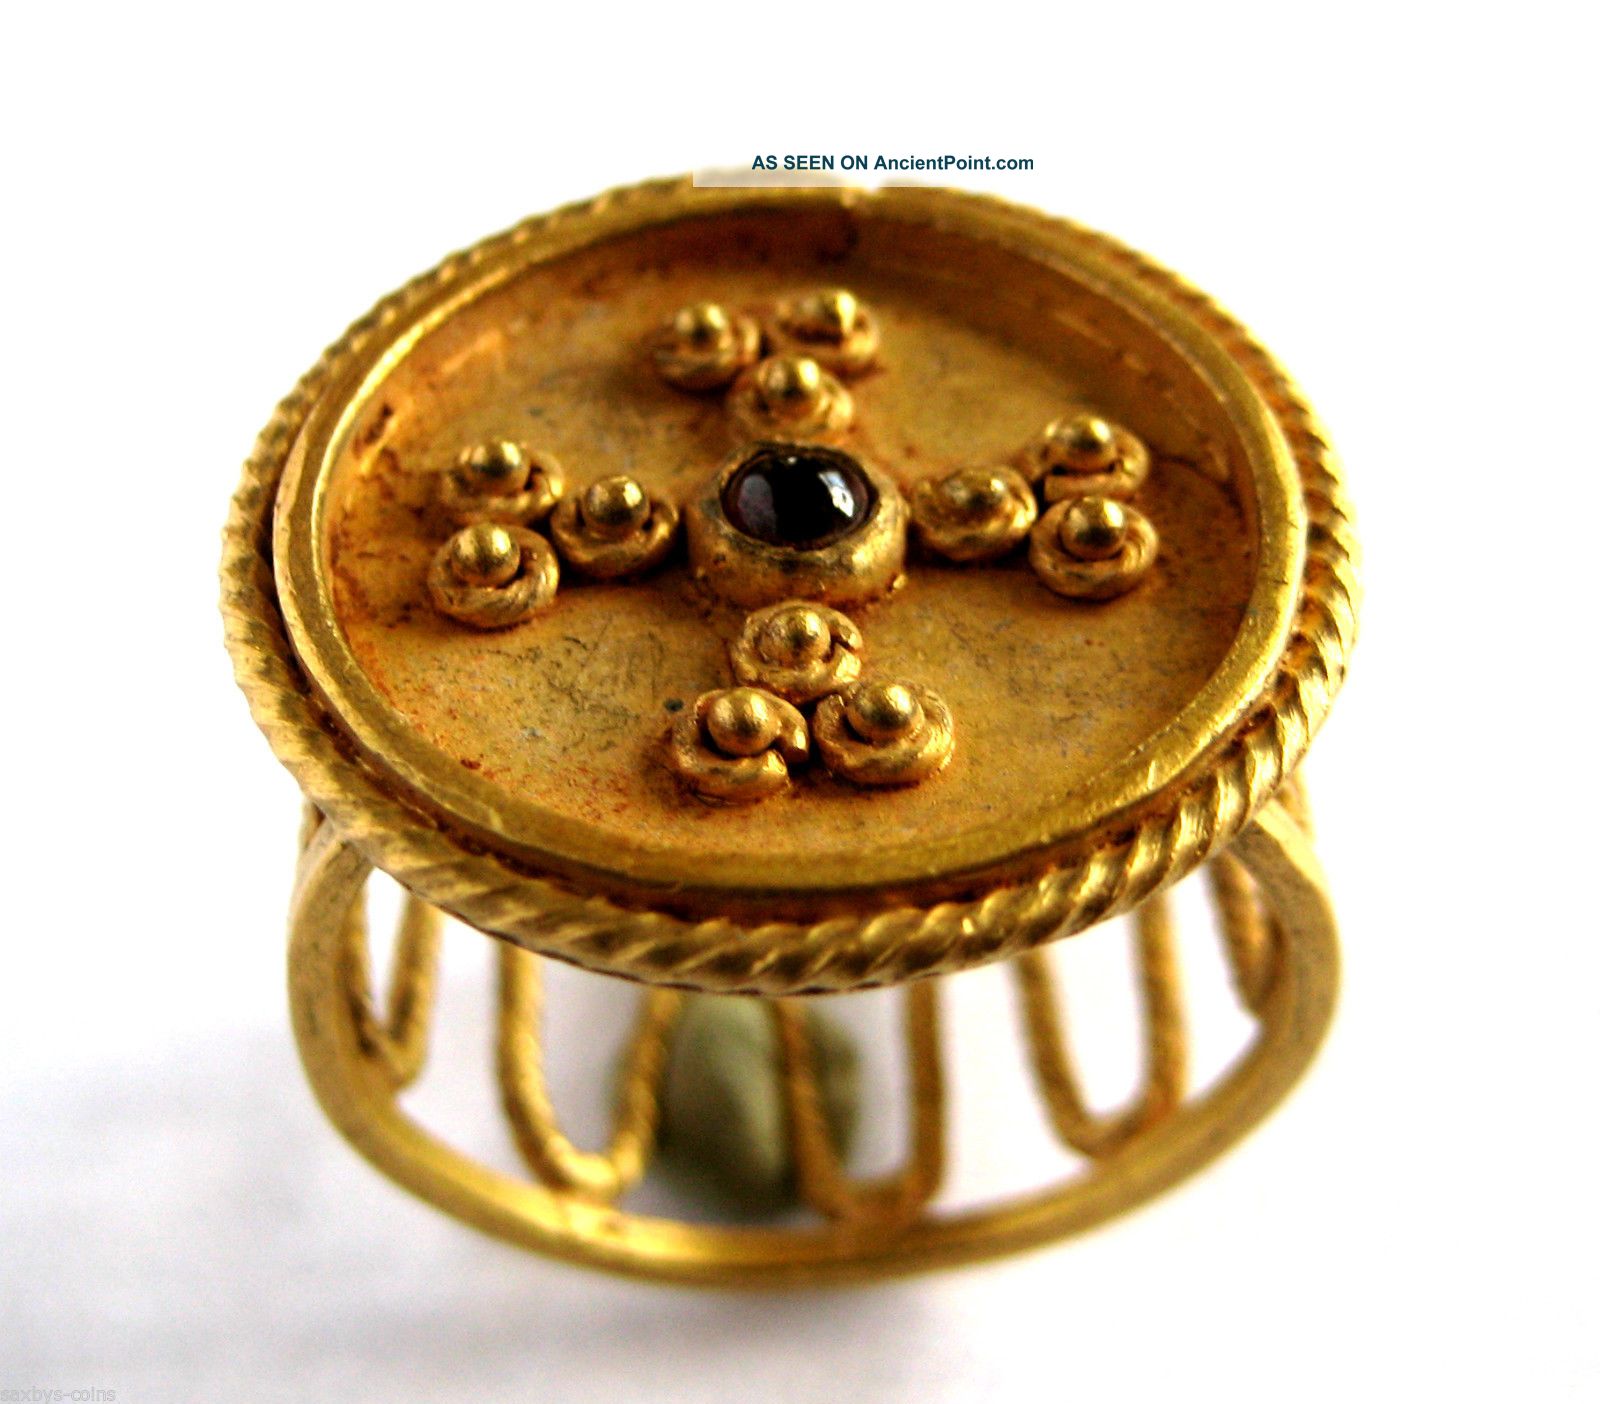 600 - 800 A.  D British Found Anglo Saxon Period Au Solid Gold & Red Garnet Ring Uncategorized photo